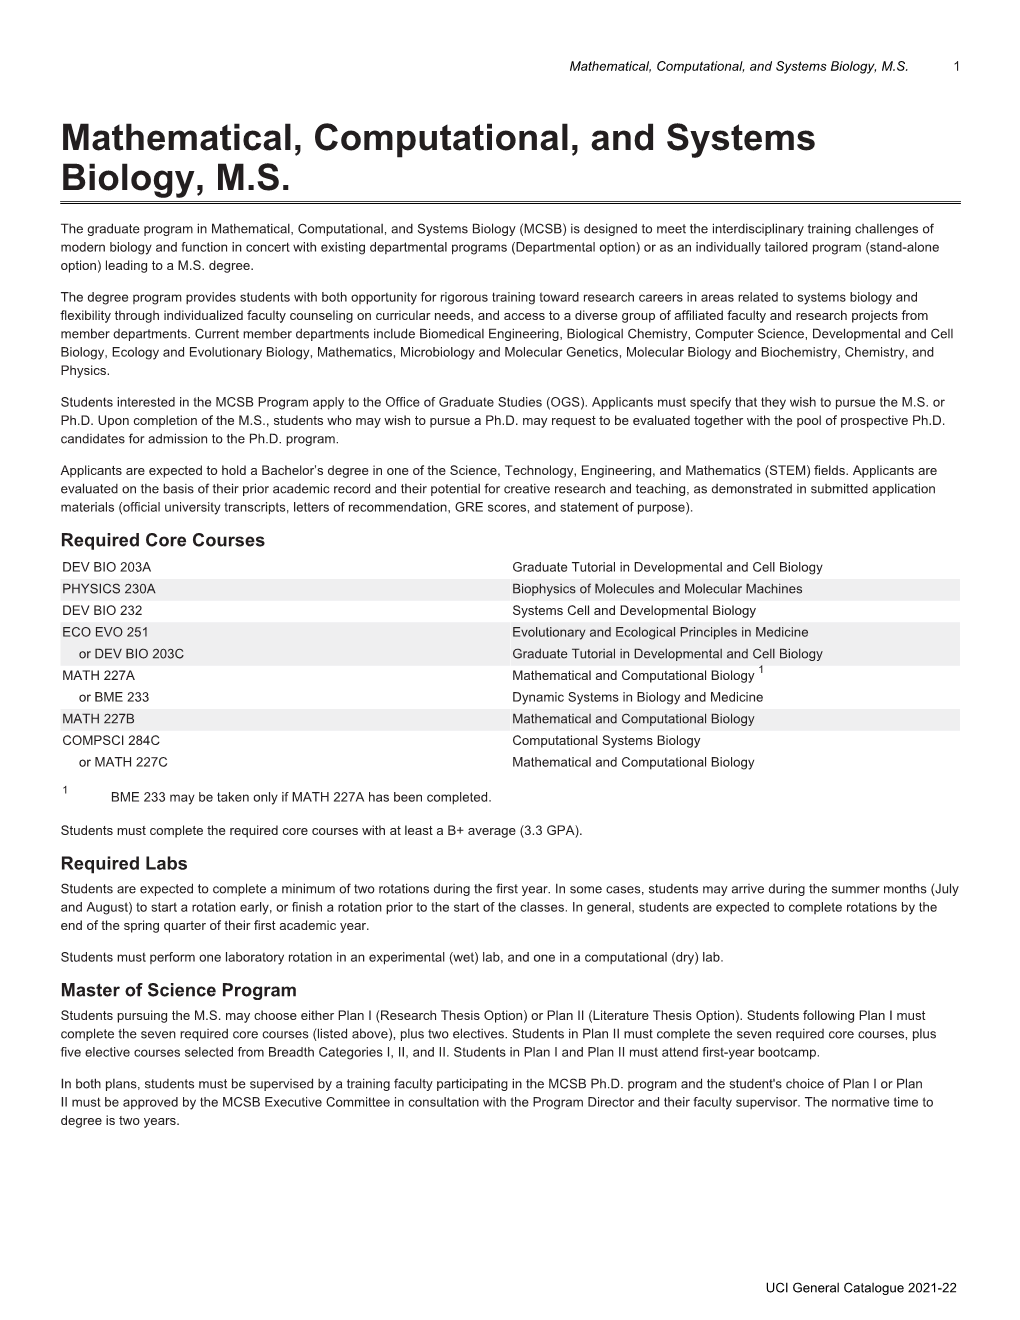 Mathematical, Computational, and Systems Biology, M.S. 1